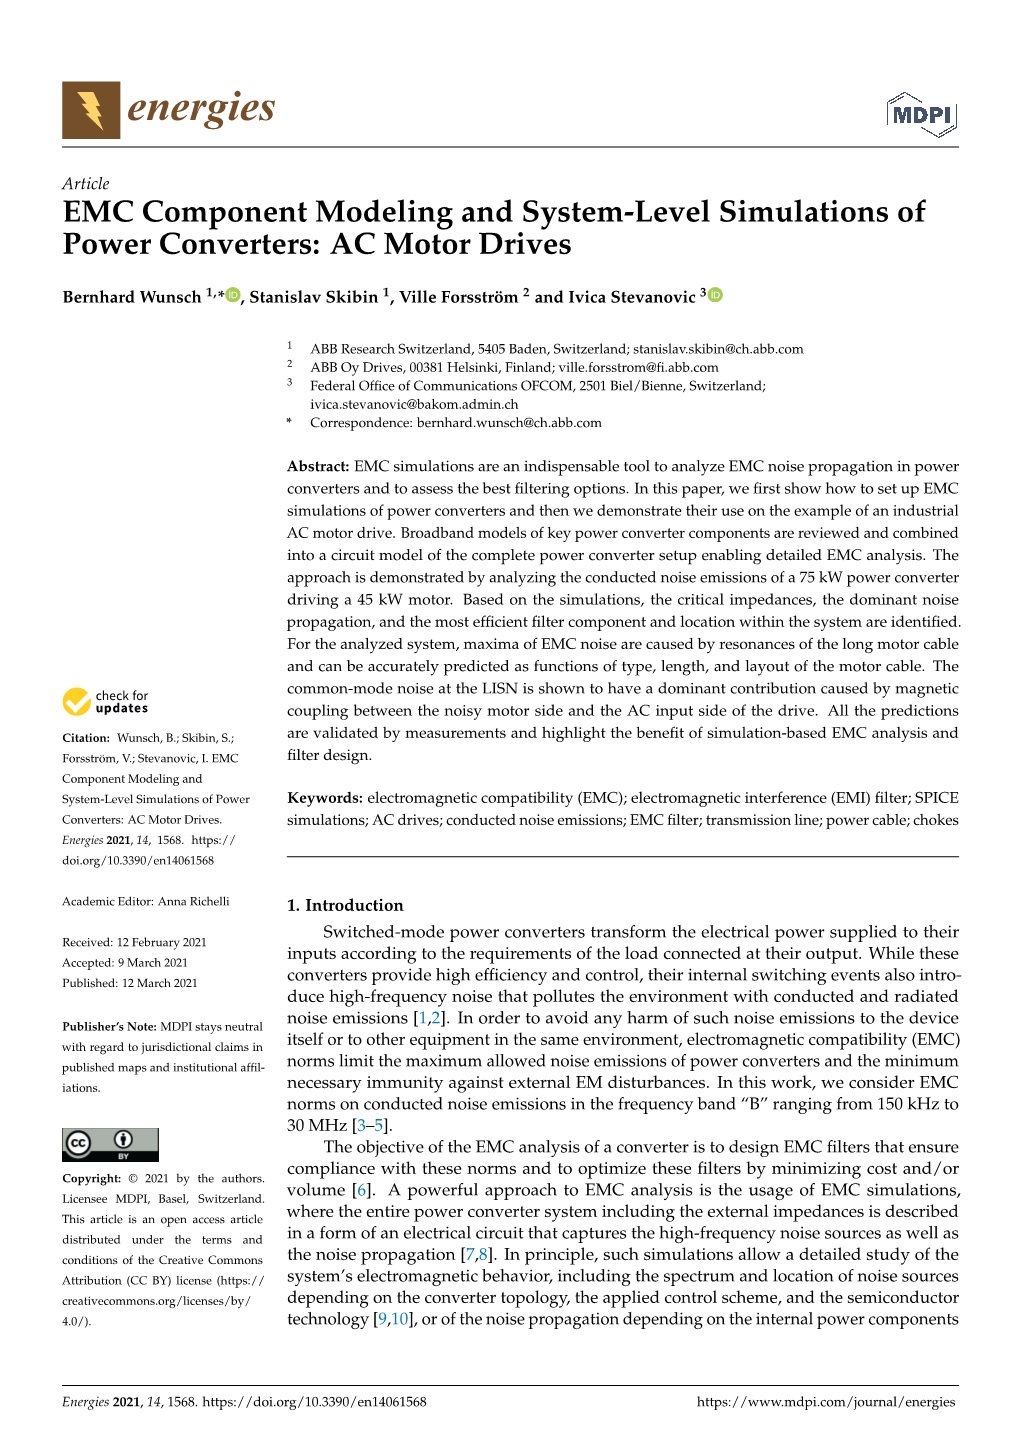 EMC Component Modeling and System-Level Simulations of Power Converters: AC Motor Drives